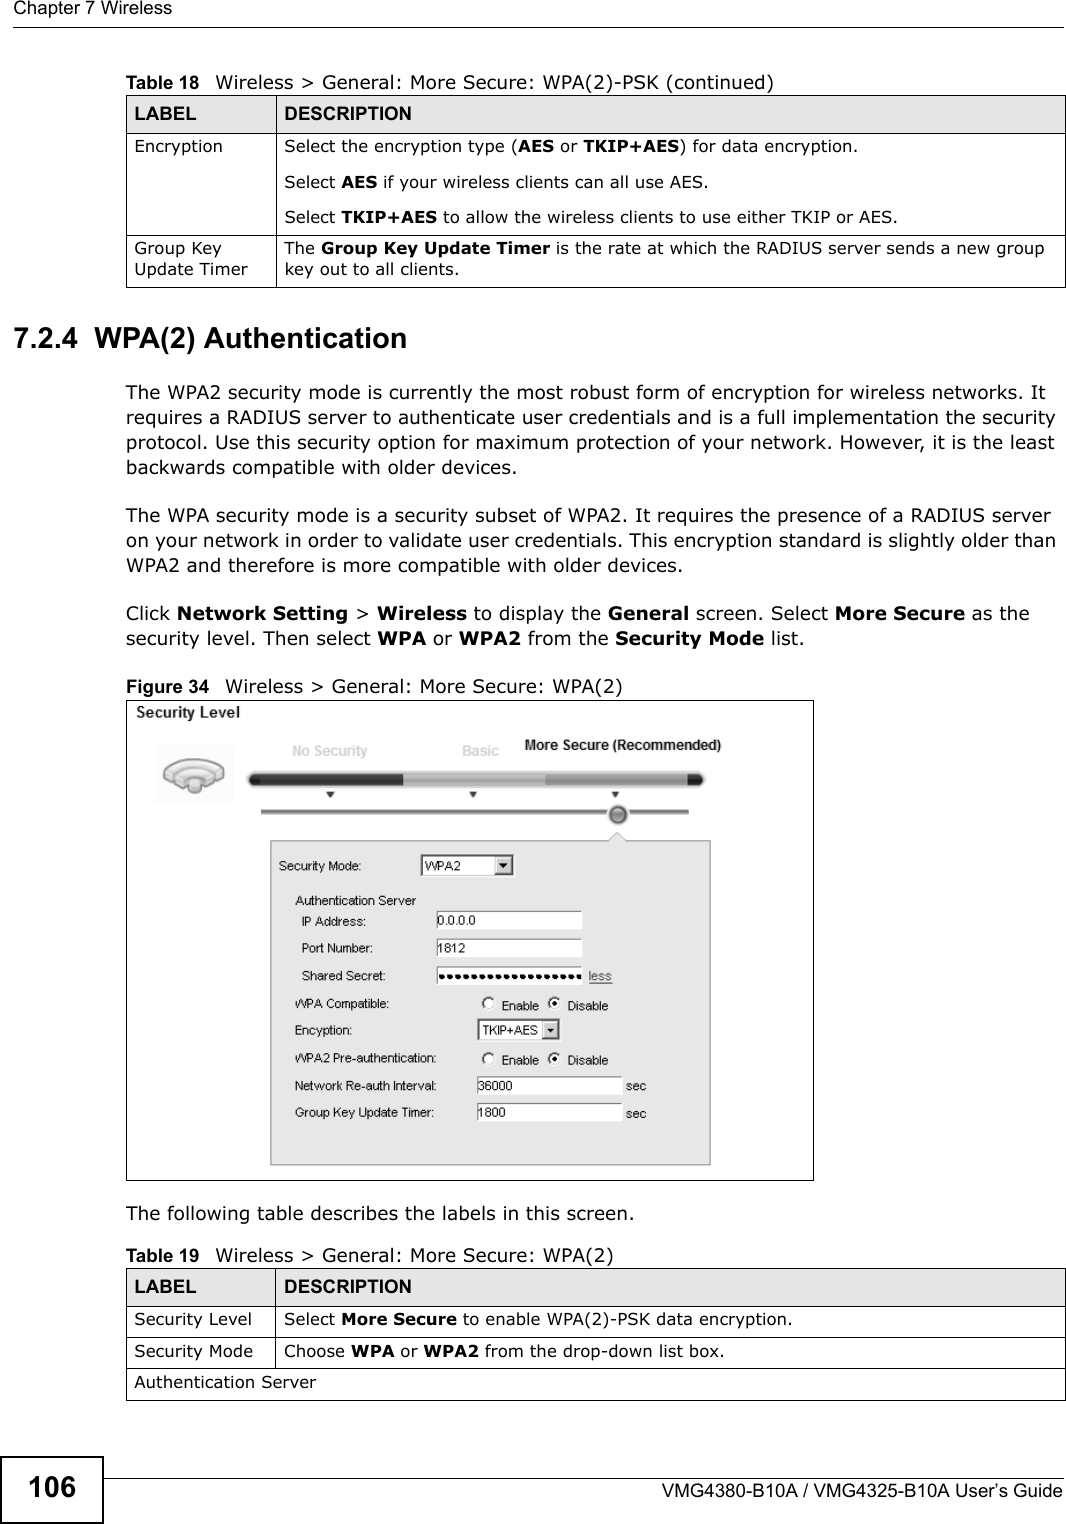 Chapter 7 WirelessVMG4380-B10A / VMG4325-B10A User’s Guide1067.2.4  WPA(2) AuthenticationThe WPA2 security mode is currently the most robust form of encryption for wireless networks. Itrequires a RADIUS server to authenticate user credentials and is a full implementation the securityprotocol. Use this security option for maximum protection of your network. However, it is the least backwards compatible with older devices.The WPA security mode is a security subset of WPA2. It requires the presence of a RADIUS serveron your network in order to validate user credentials. This encryption standard is slightly older than WPA2 and therefore is more compatible with older devices.Click Network Setting &gt; Wireless to display the General screen. Select More Secure as the security level. Then select WPA or WPA2 from the Security Mode list.Figure 34   Wireless &gt; General: More Secure: WPA(2)The following table describes the labels in this screen.Encryption Select the encryption type (AES or TKIP+AES) for data encryption.Select AES if your wireless clients can all use AES.Select TKIP+AES to allow the wireless clients to use either TKIP or AES.Group Key Update TimerThe Group Key Update Timer is the rate at which the RADIUS server sends a new group key out to all clients.Table 18   Wireless &gt; General: More Secure: WPA(2)-PSK (continued)LABEL DESCRIPTIONTable 19   Wireless &gt; General: More Secure: WPA(2)LABEL DESCRIPTIONSecurity Level Select More Secure to enable WPA(2)-PSK data encryption.Security Mode Choose WPA or WPA2 from the drop-down list box.Authentication Server